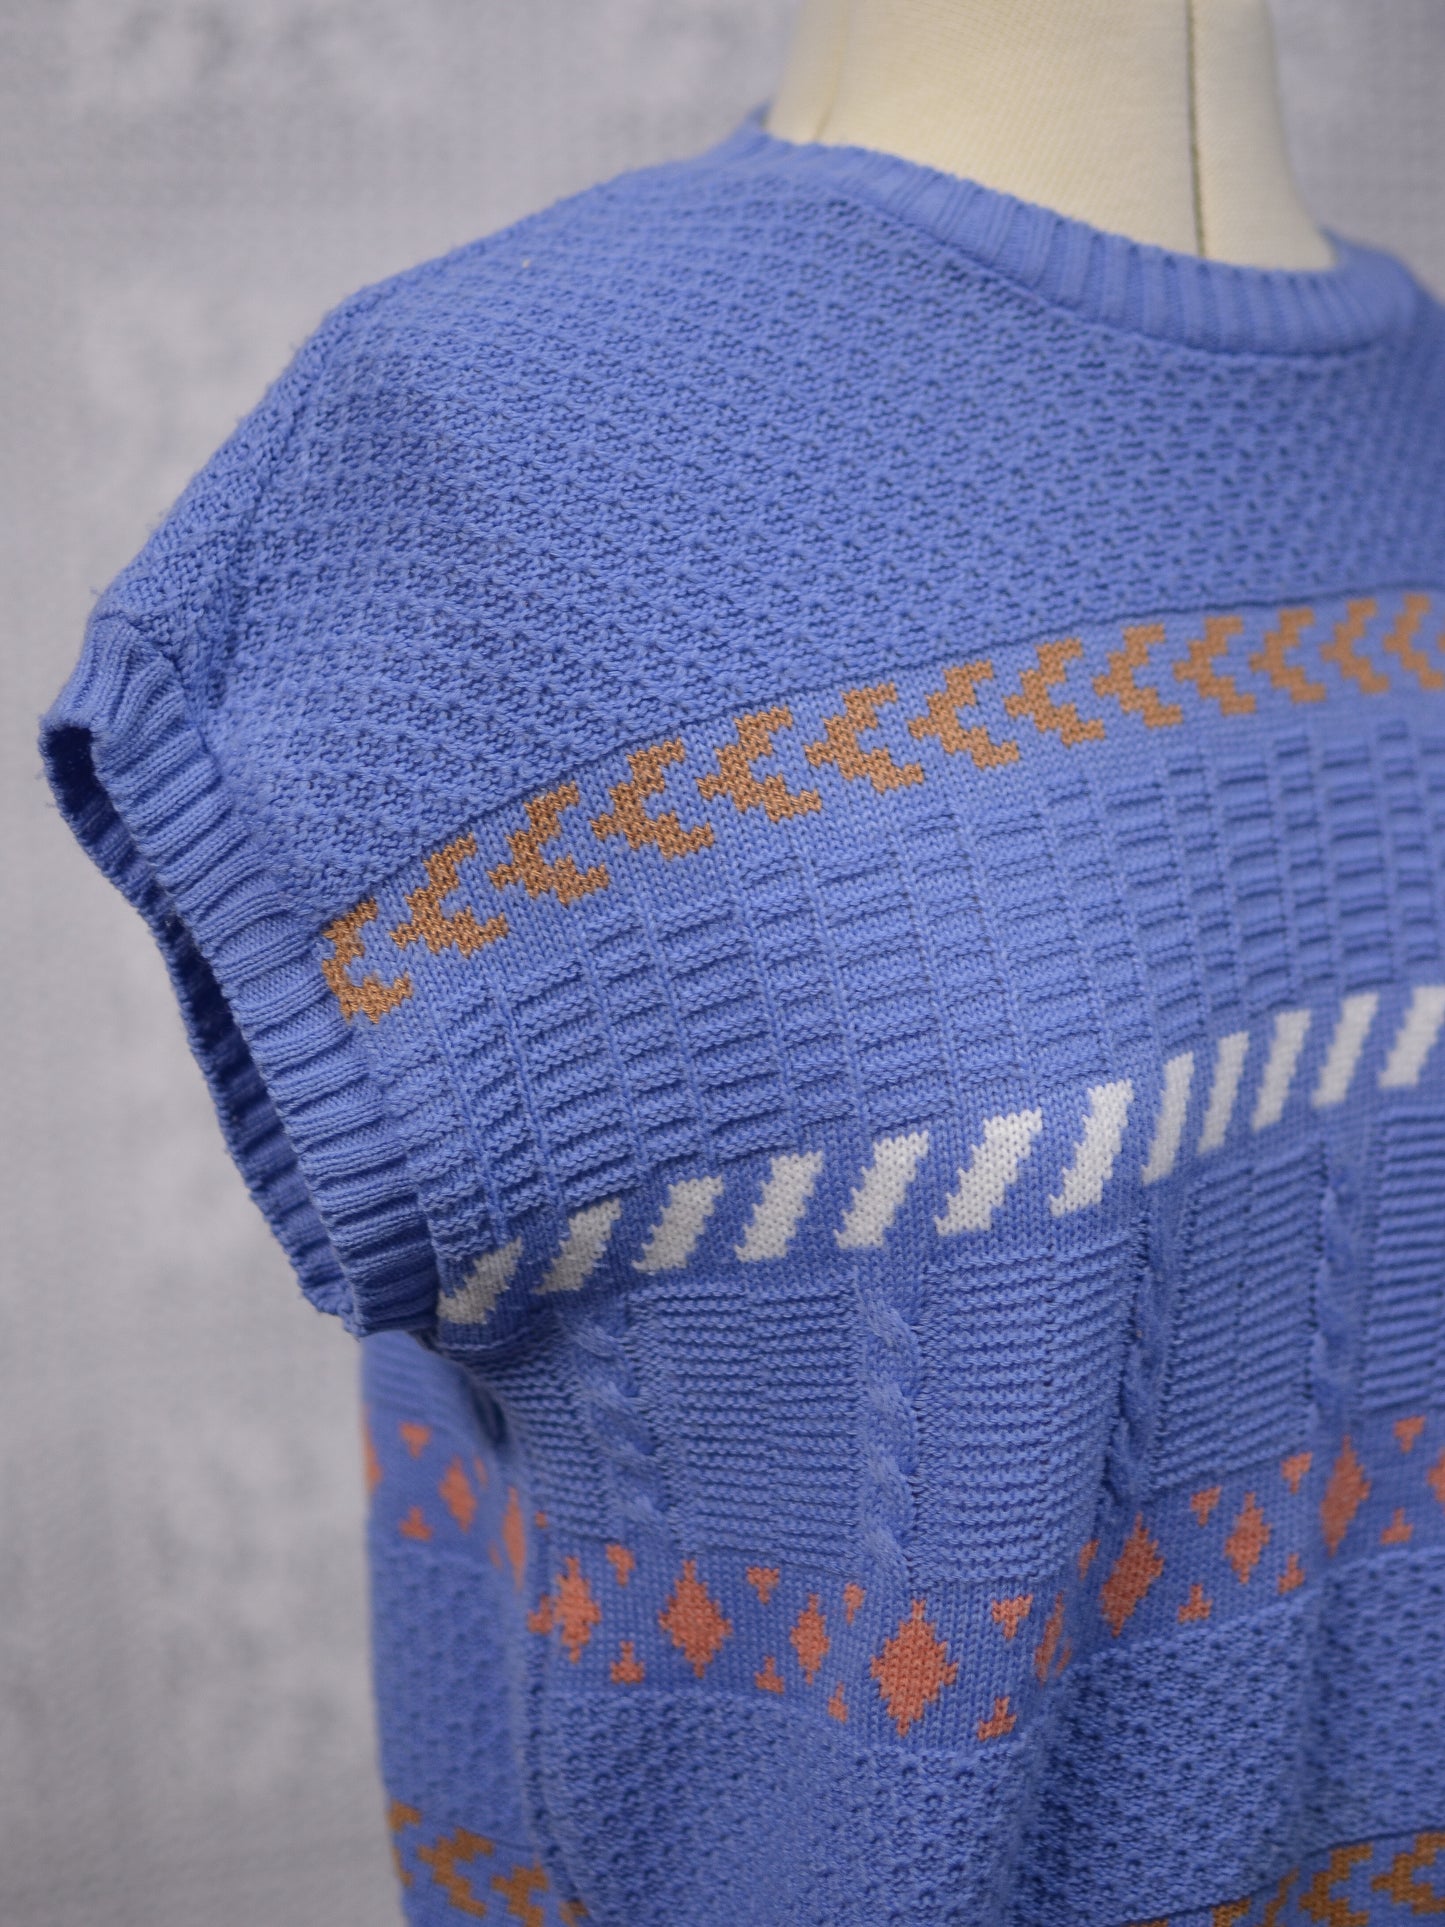 1980s blue, pink and white striped sleeveless jumper sweater vest